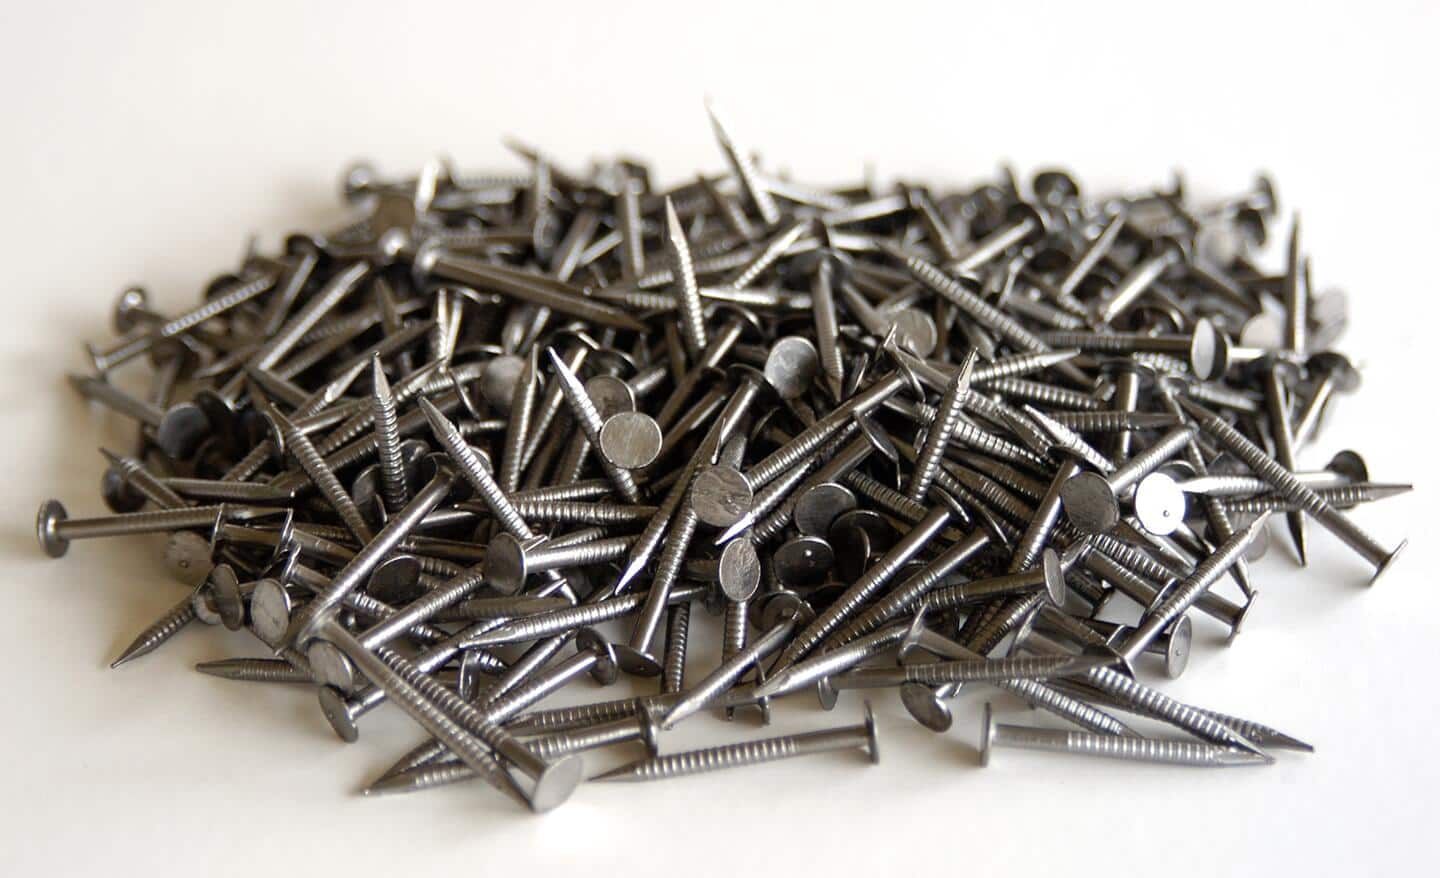 A pile of drywall nails with ringed shanks placed on a white tabletop.